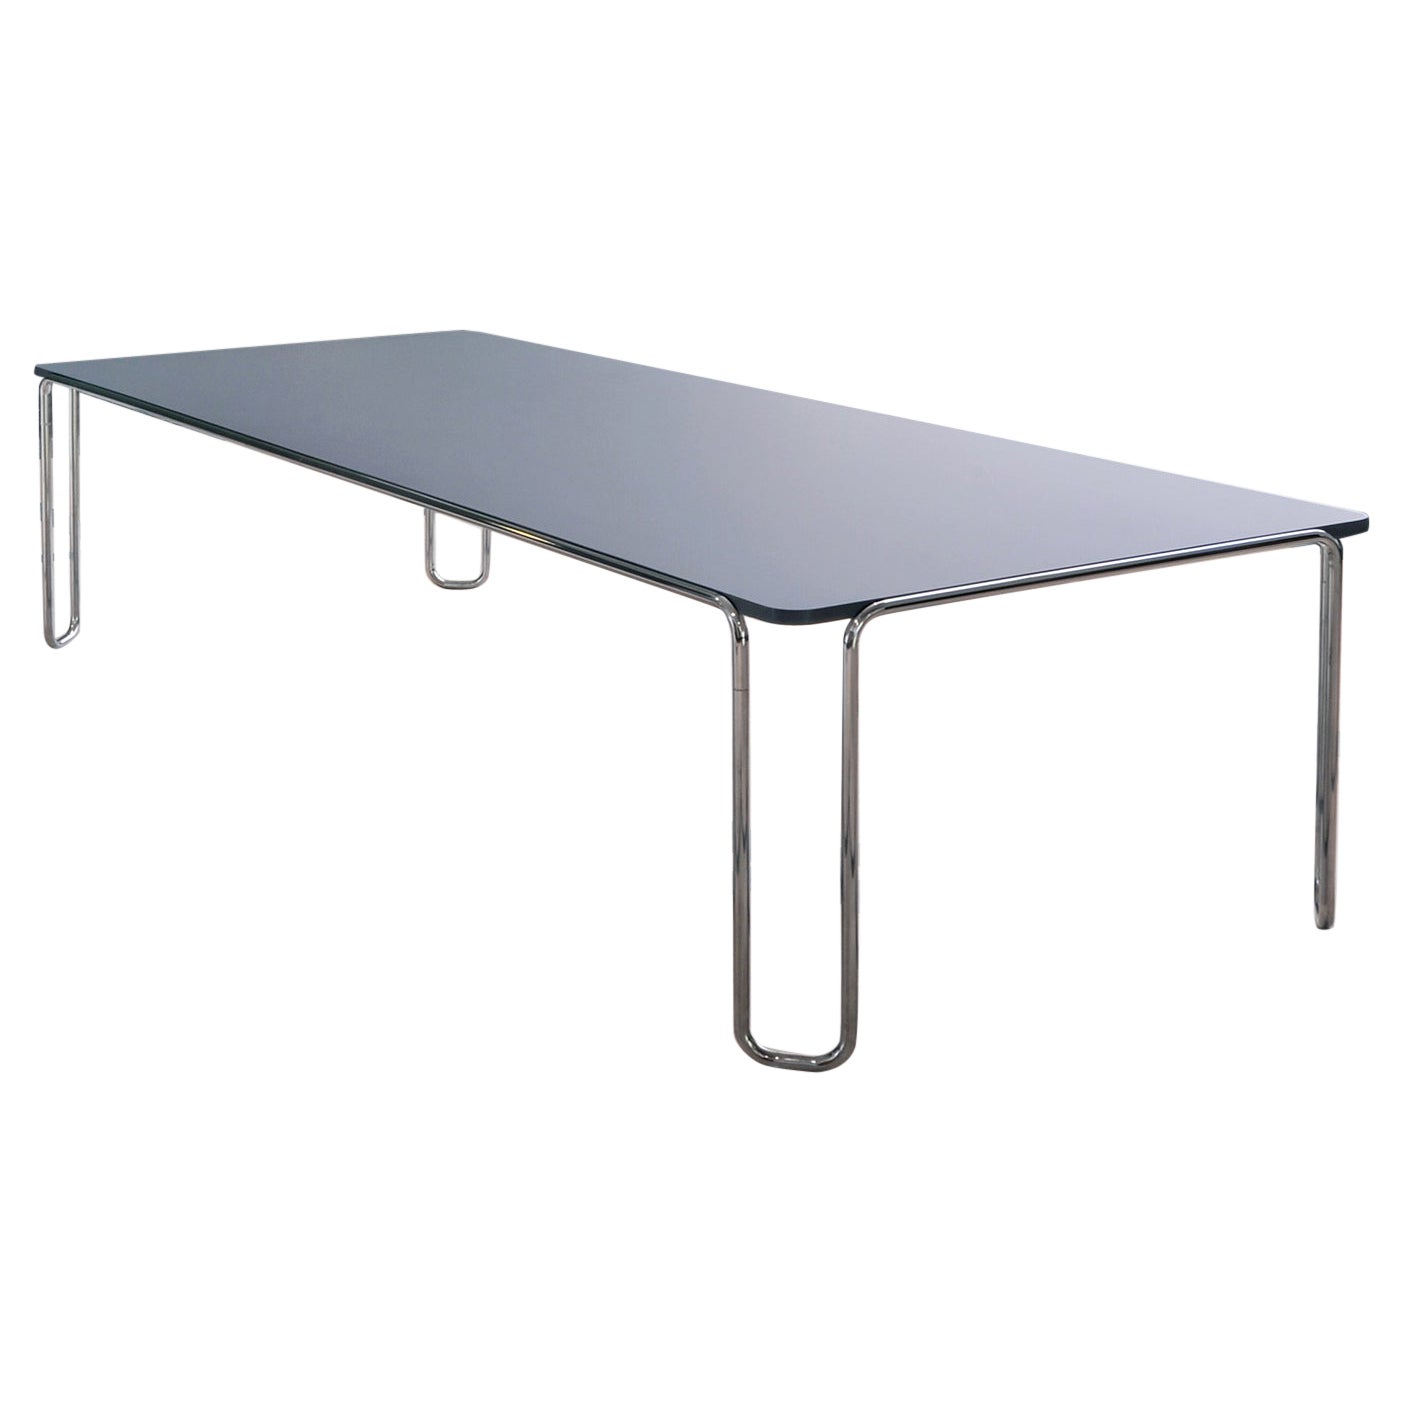 Large Modernist Custom-Made Ultra-Thin Tubular-Steel Table by GMD Berlin For Sale